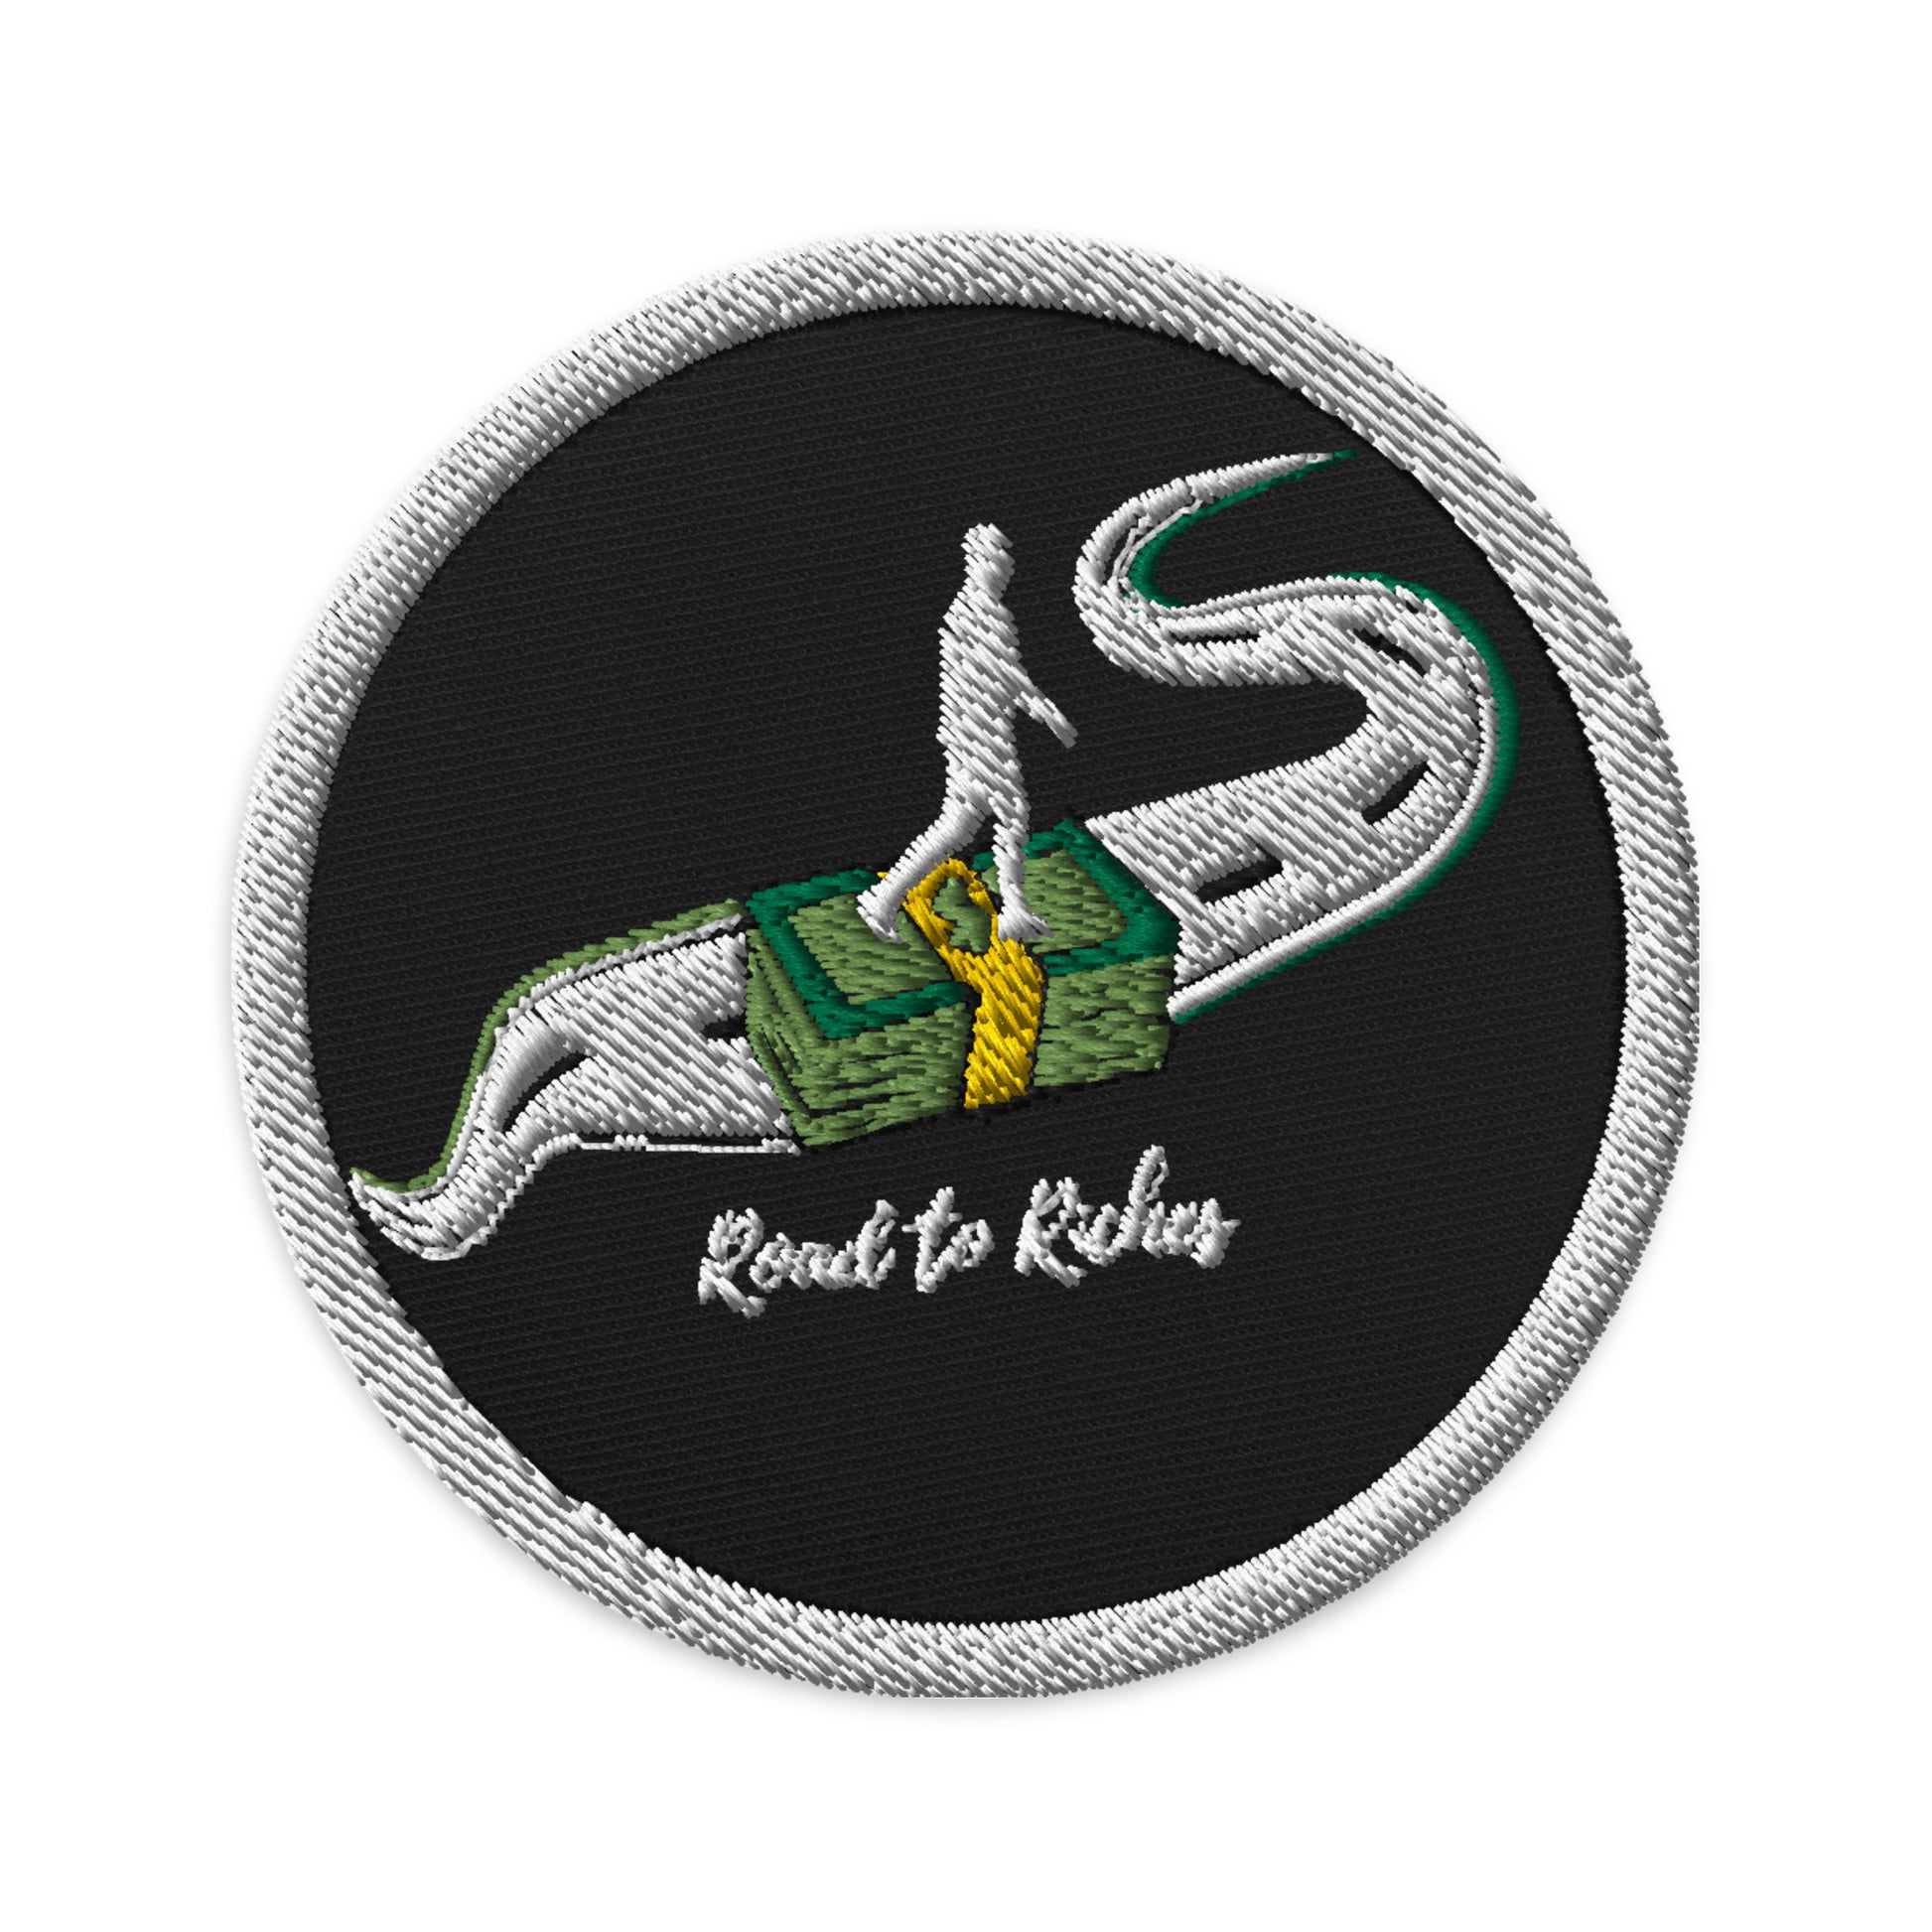 Road to Riches - Embroidered patches - Conscious tees inc.